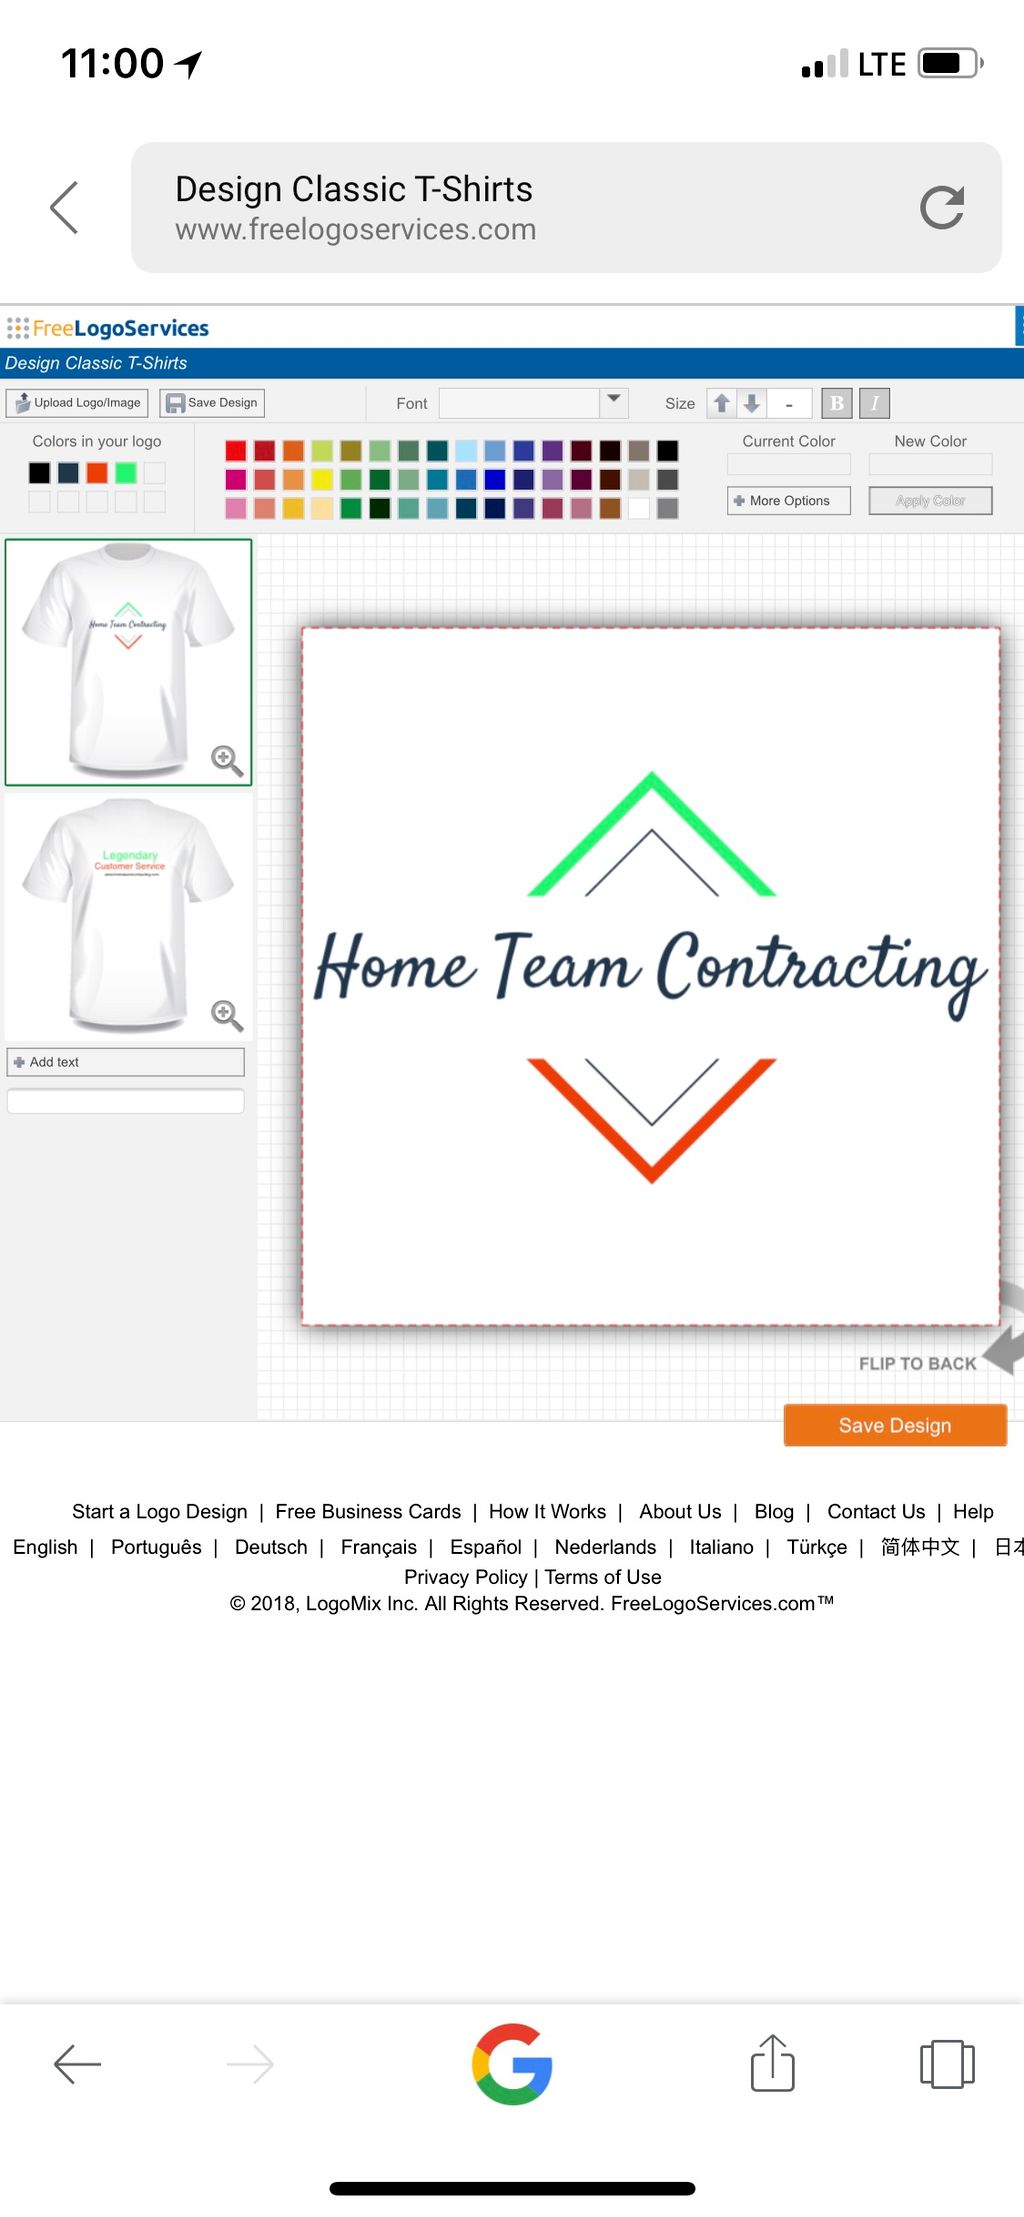 Home Team Contracting